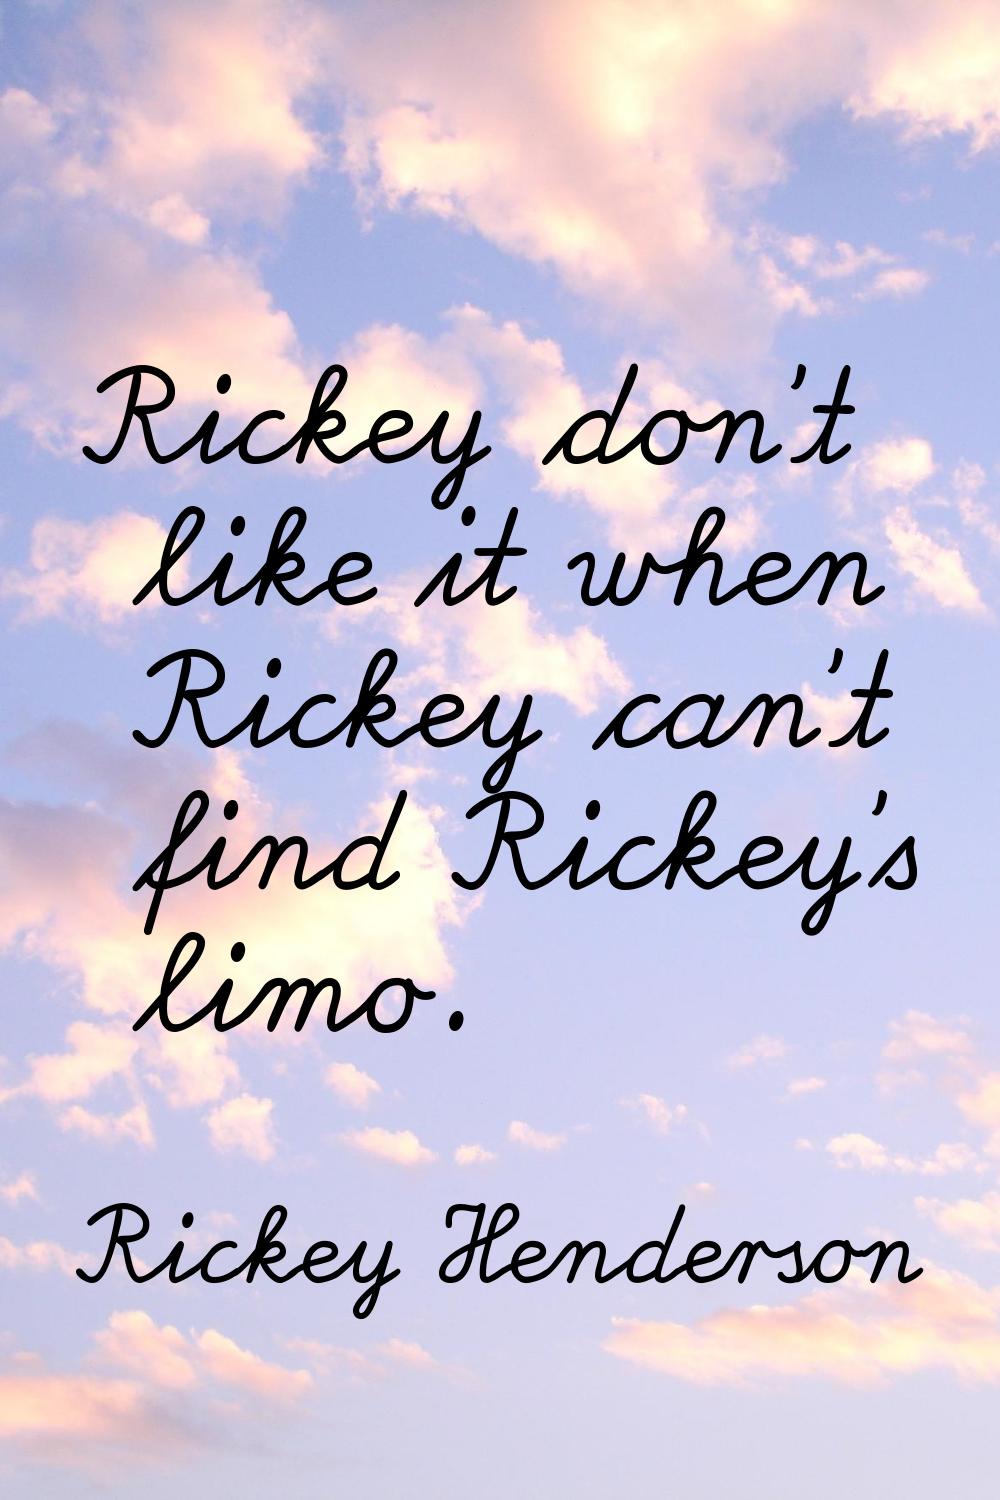 Rickey don't like it when Rickey can't find Rickey's limo.